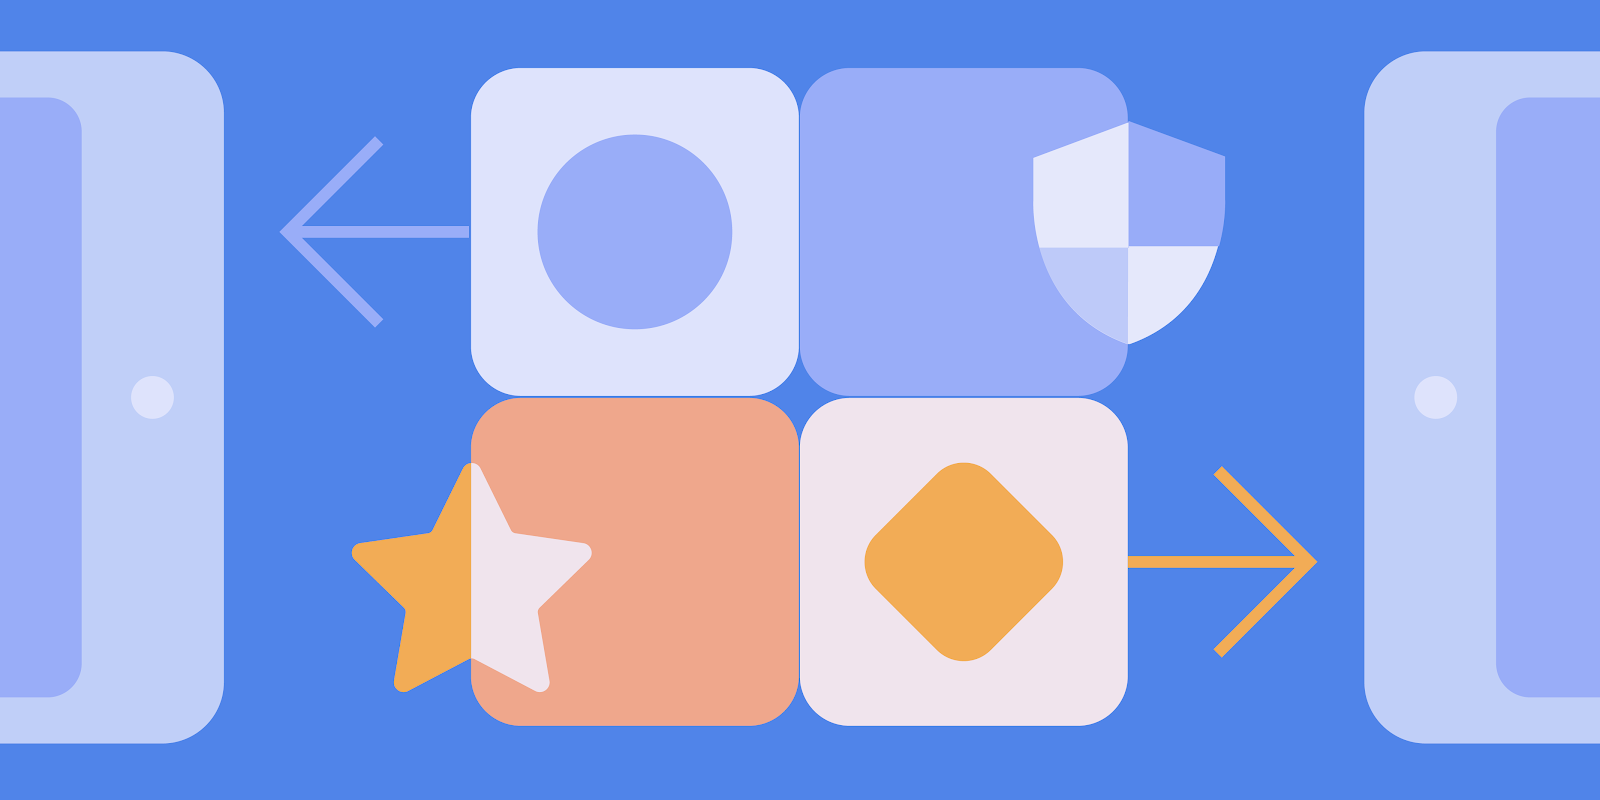 Making certain high-quality apps on Google Play